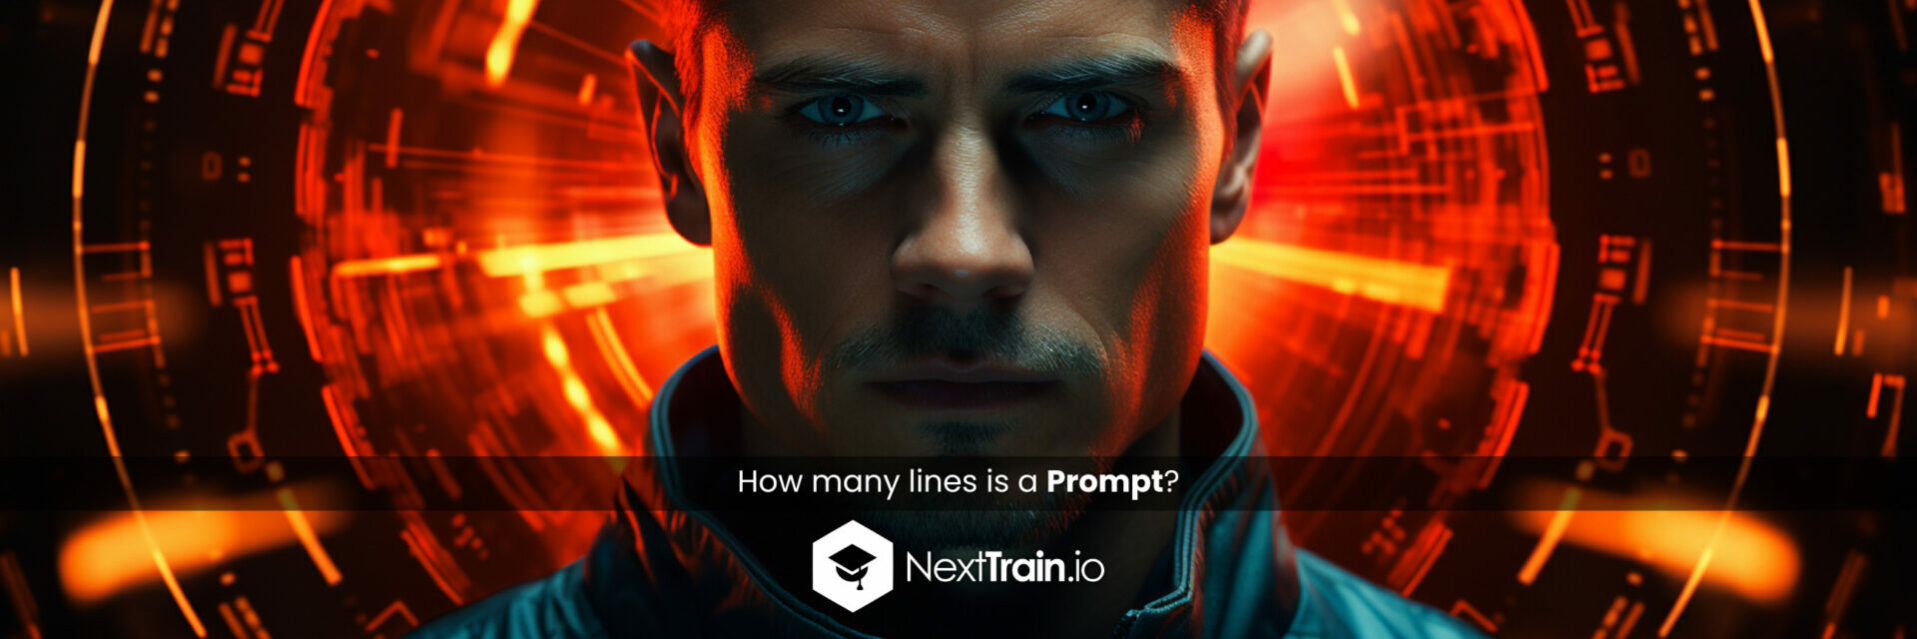 How many lines is a Prompt?